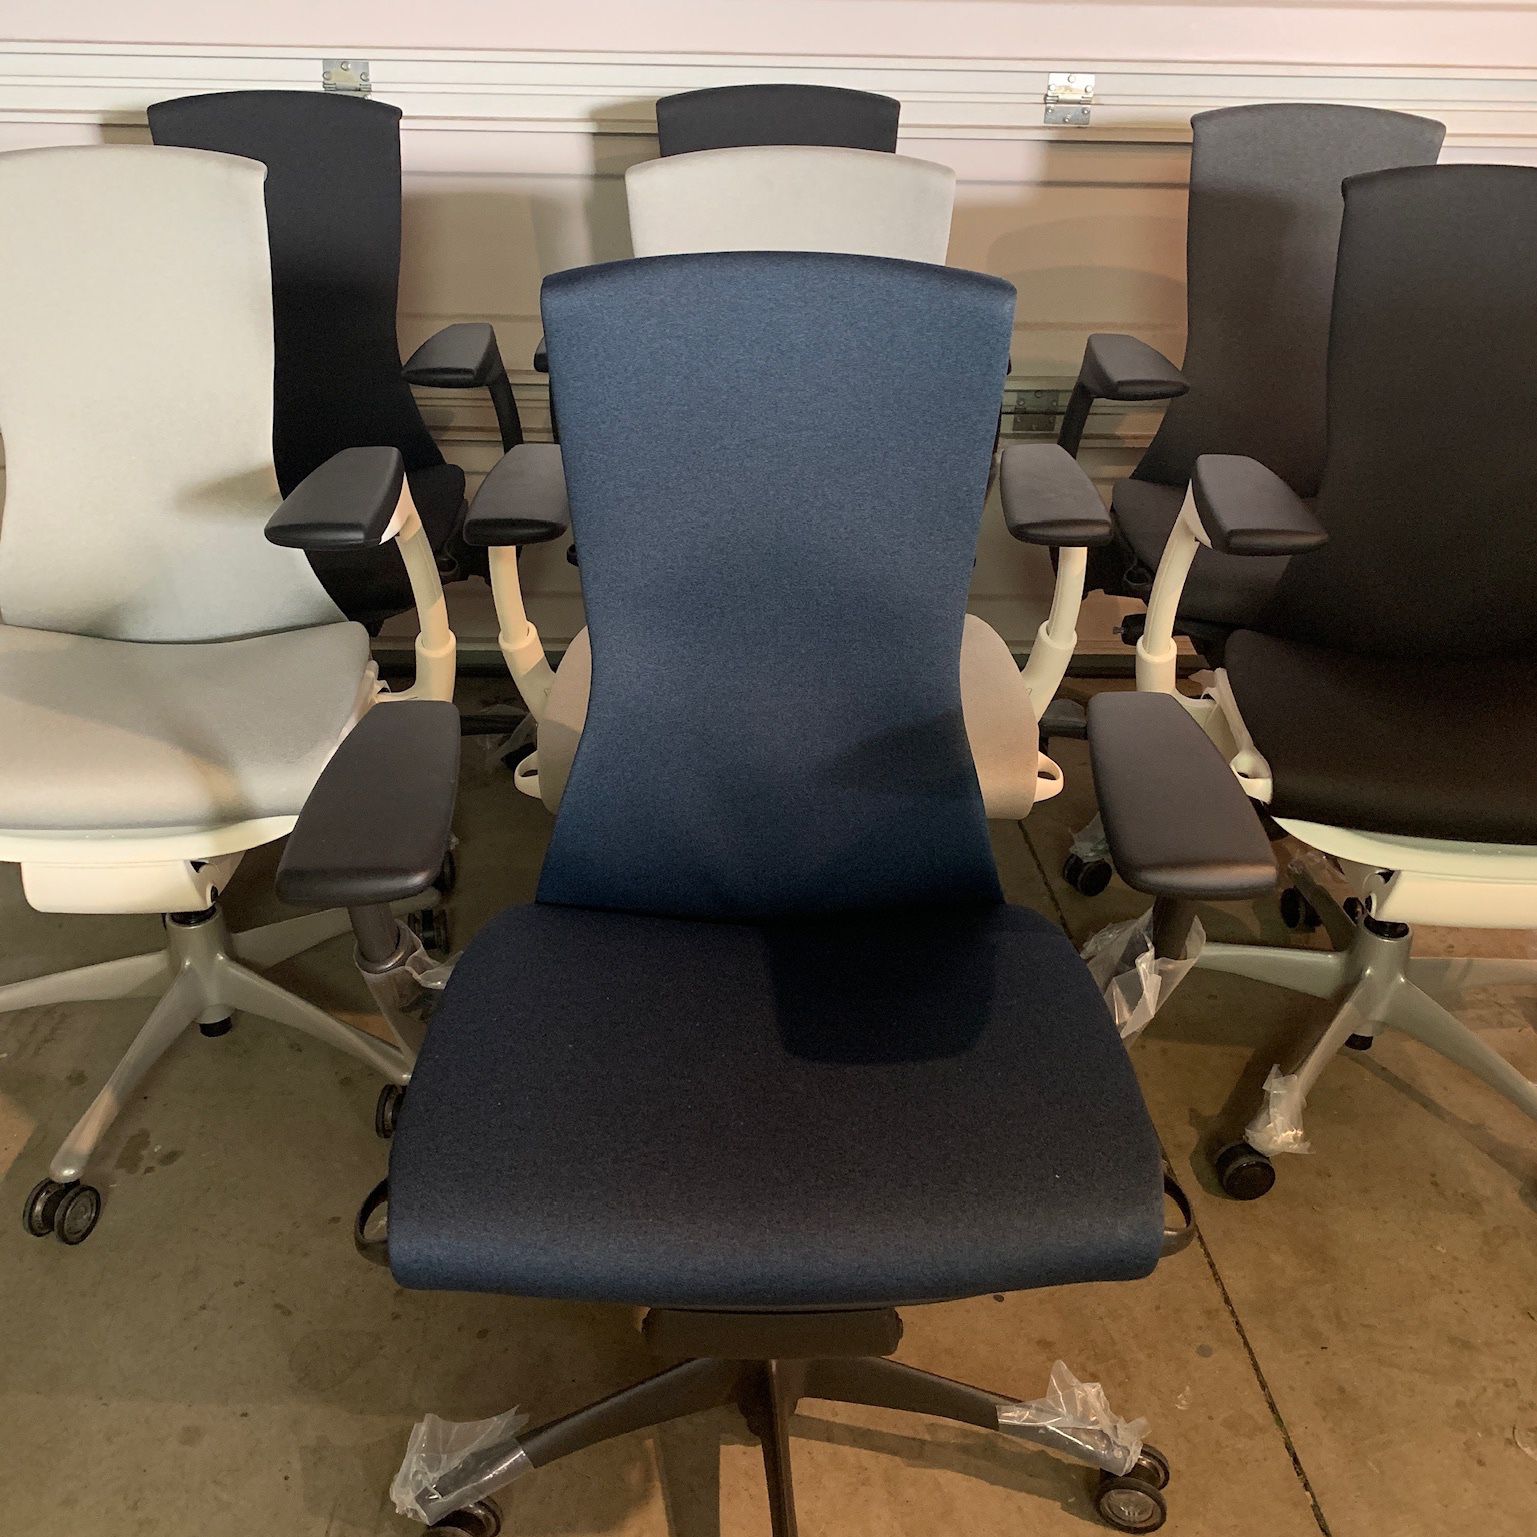 BRAND NEW/USED 2022 Herman Miller Embody Chairs Fully Loaded Brand New and. Best Ergonomic office desk chair for work and gaming.